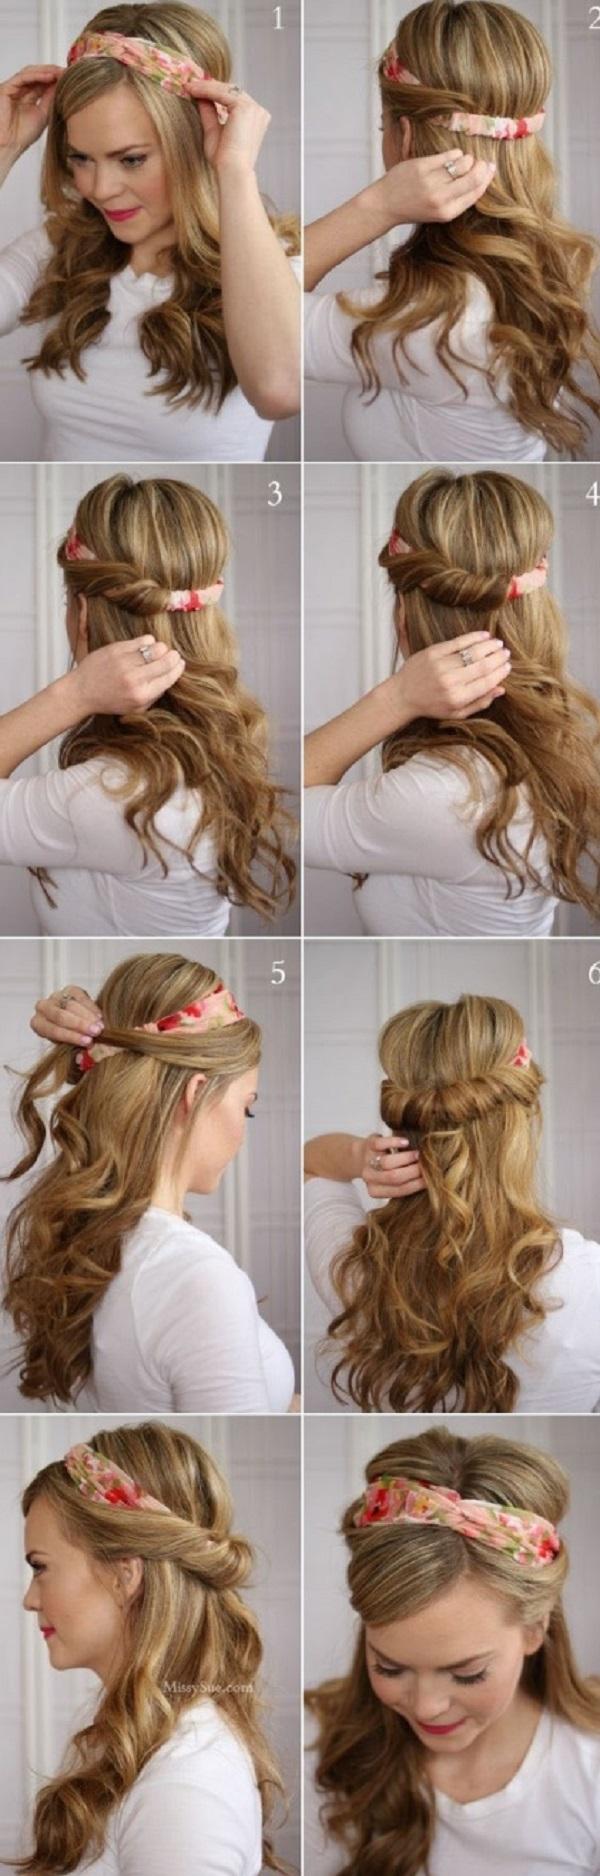 6 Easy & Stylish Hairstyles For a Lazy Day | Sarah Scoop